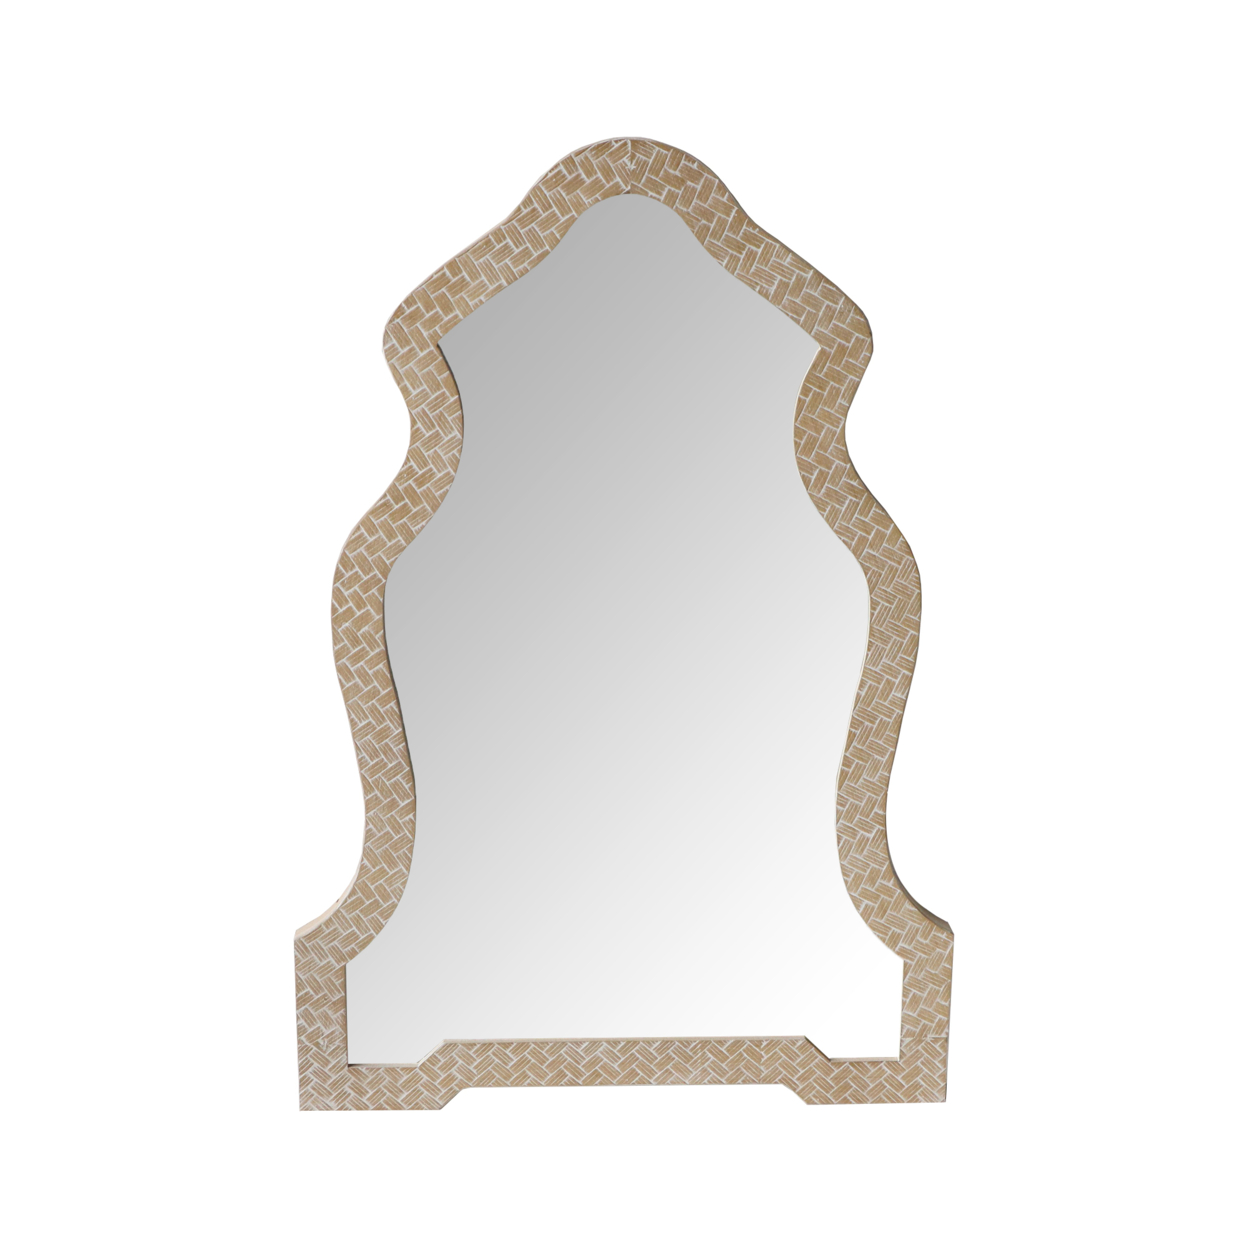 Scalloped Top Wooden Framed Wall Mirror With Geometric Texture, Brown- Saltoro Sherpi